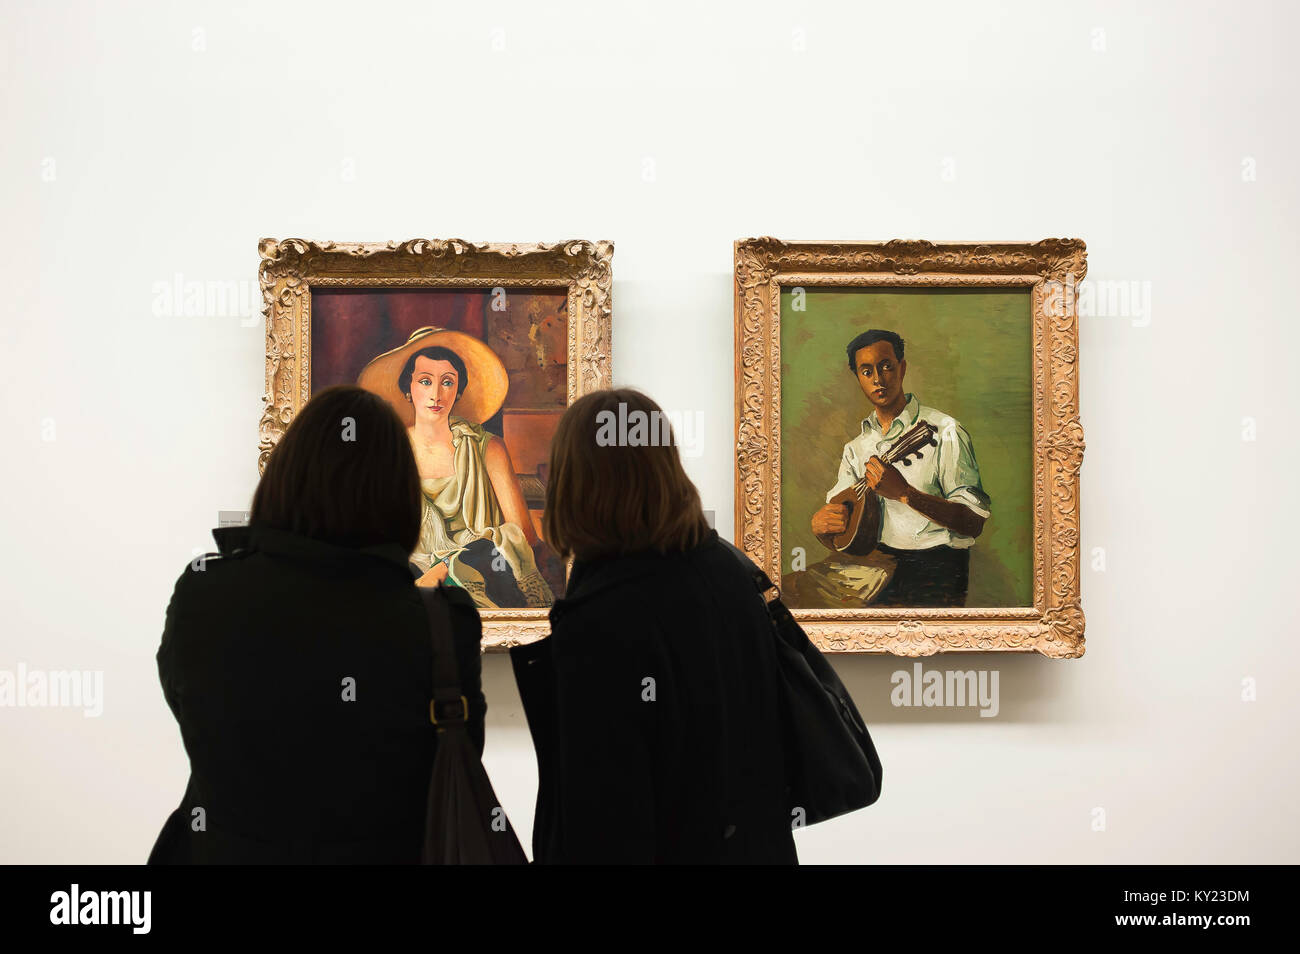 Women looking at a painting, two women study a painting by Andre Derain titled 'Madame Paul Guillaume' in the Musee de L'Orangerie in Paris  France Stock Photo